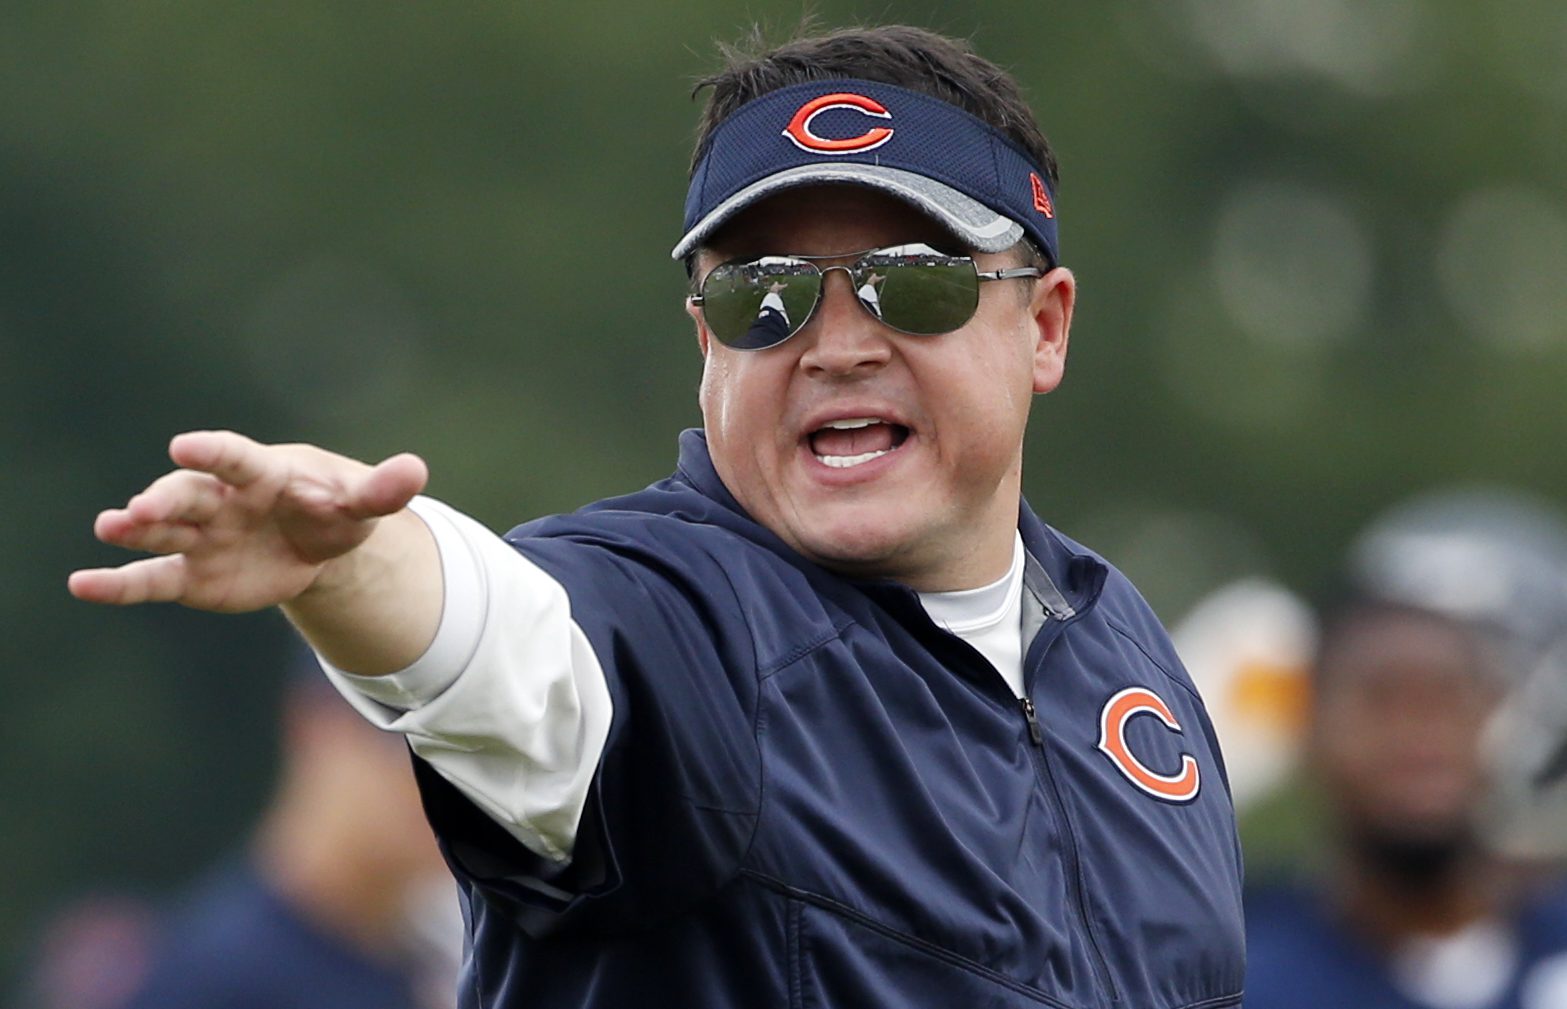 Chicago Bears offensive coordinator Dowell Loggains talks to his team during practice at Olivet Nazarene University, in Bourbonnais, Ill. (AP Photo/Nam Y. Huh)